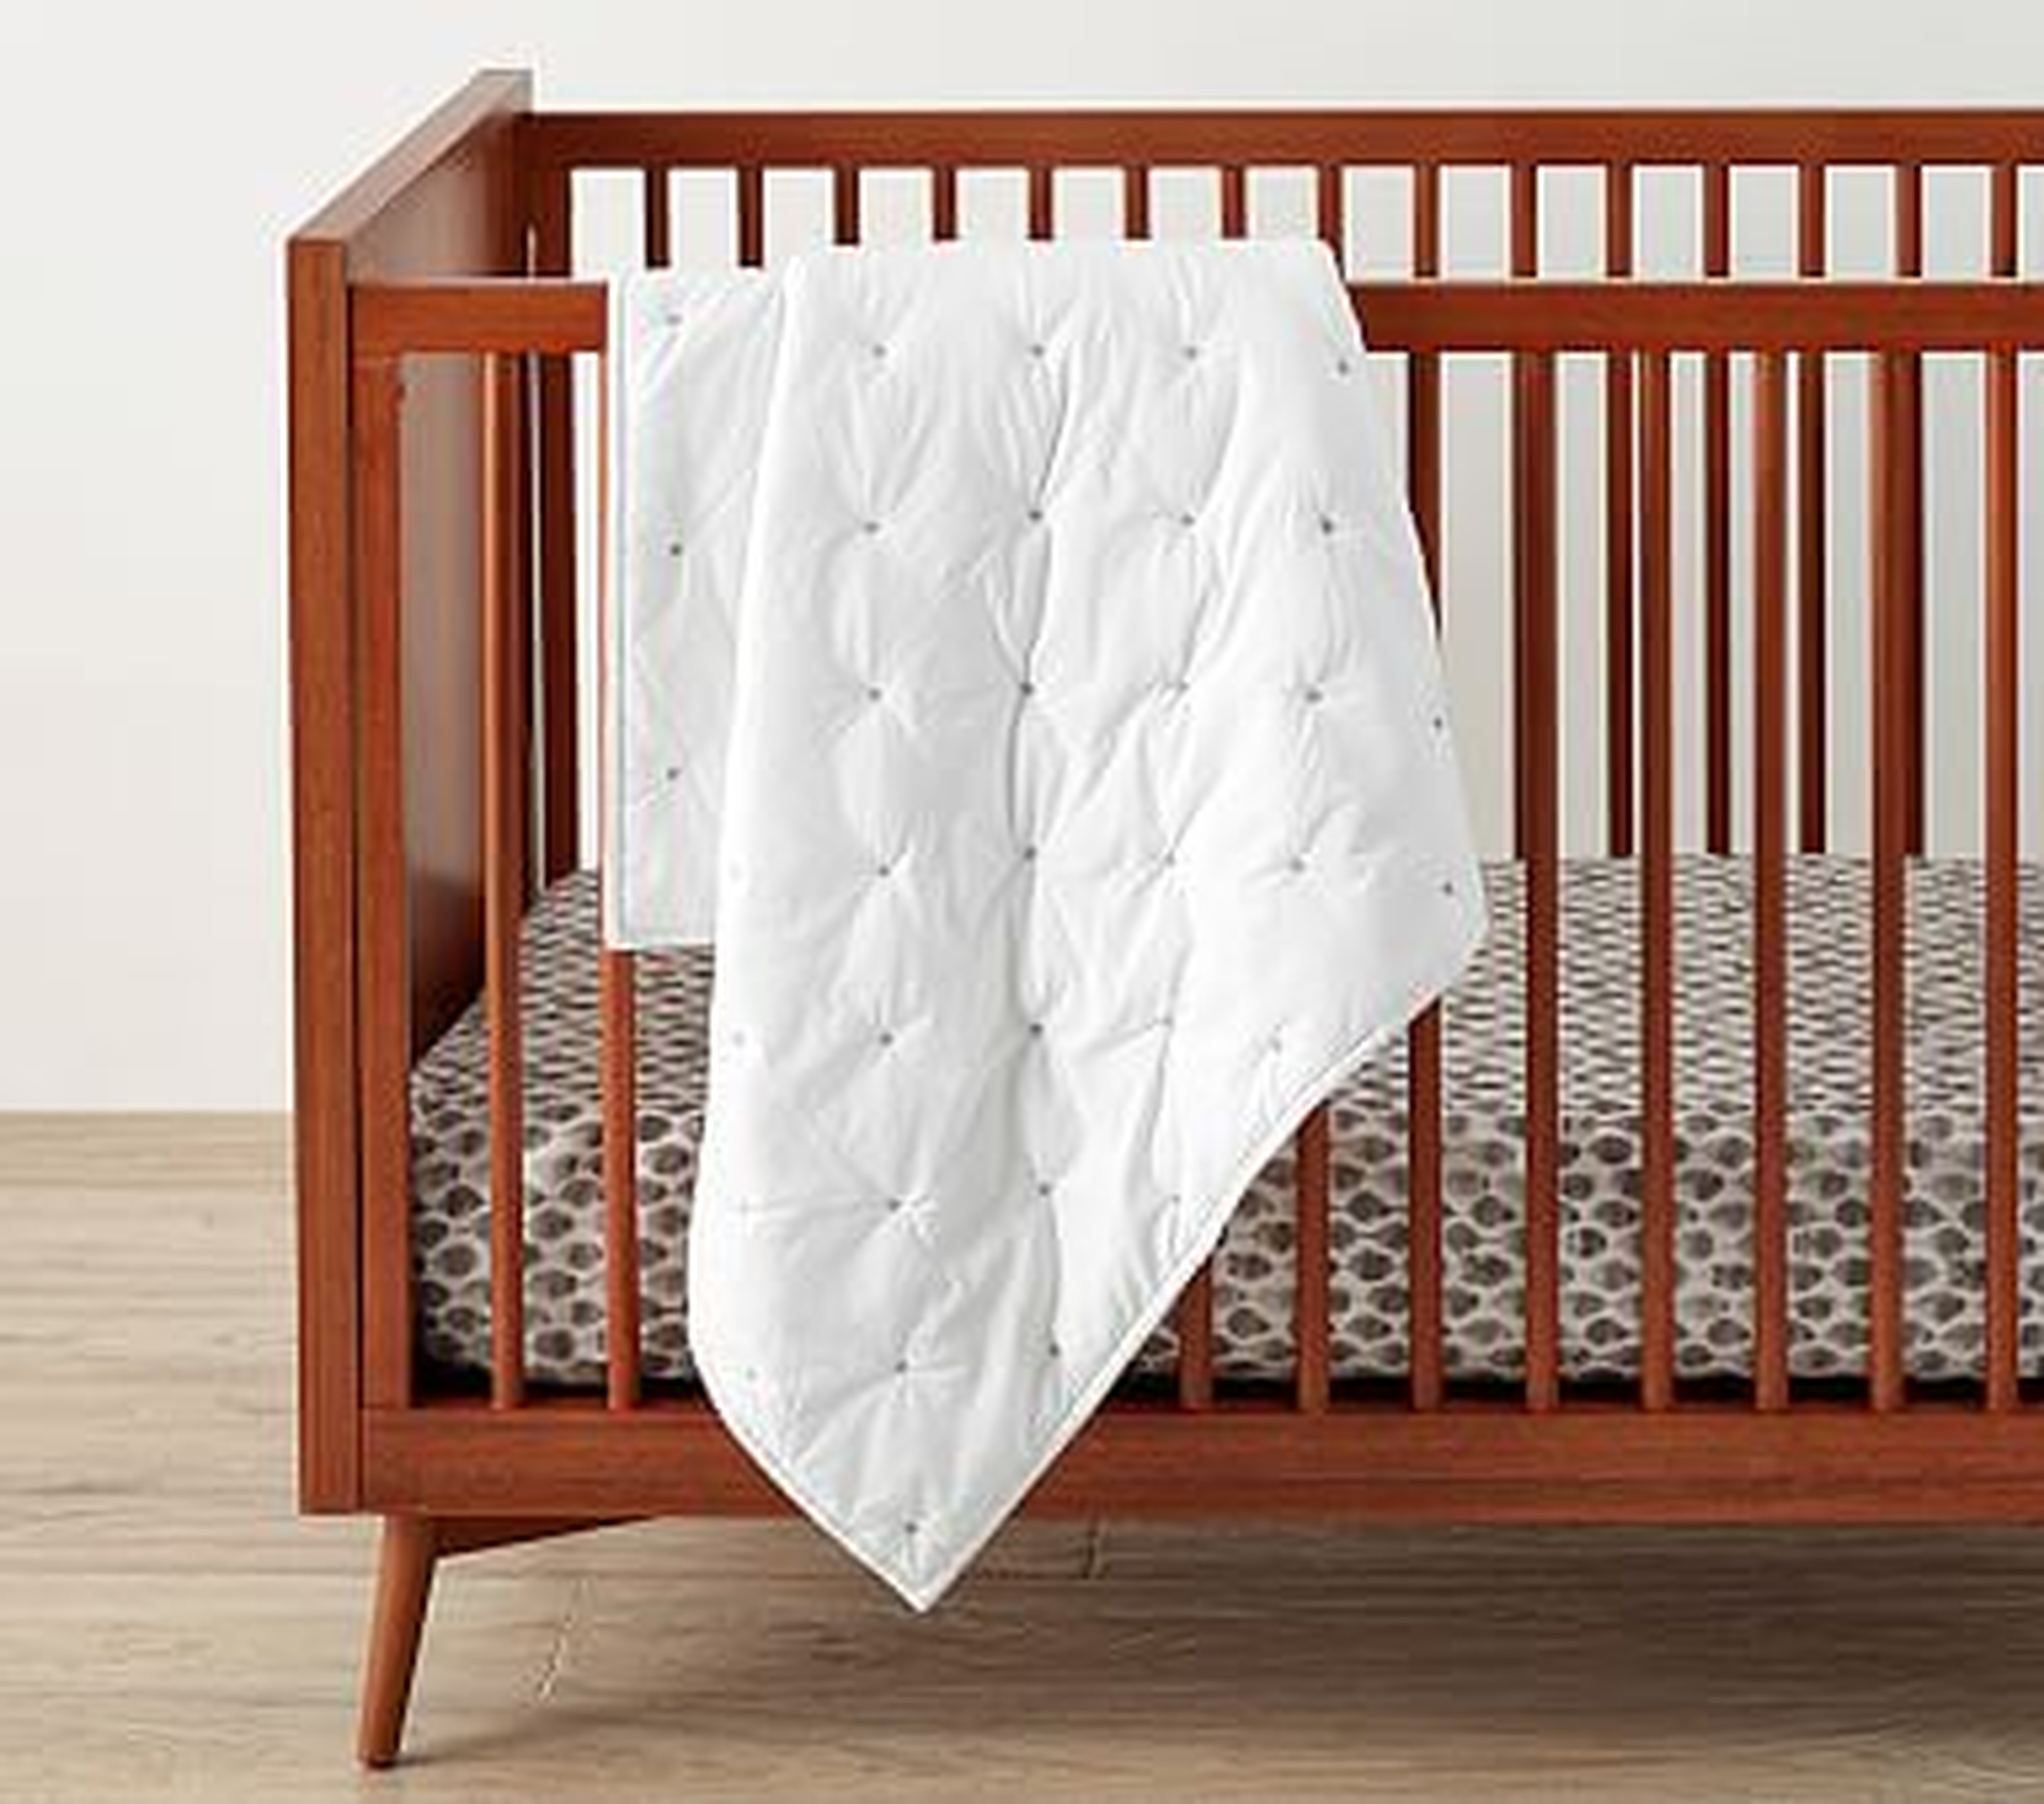 west elm x pbk Washed Cotton Toddler Quilt, White - Pottery Barn Kids